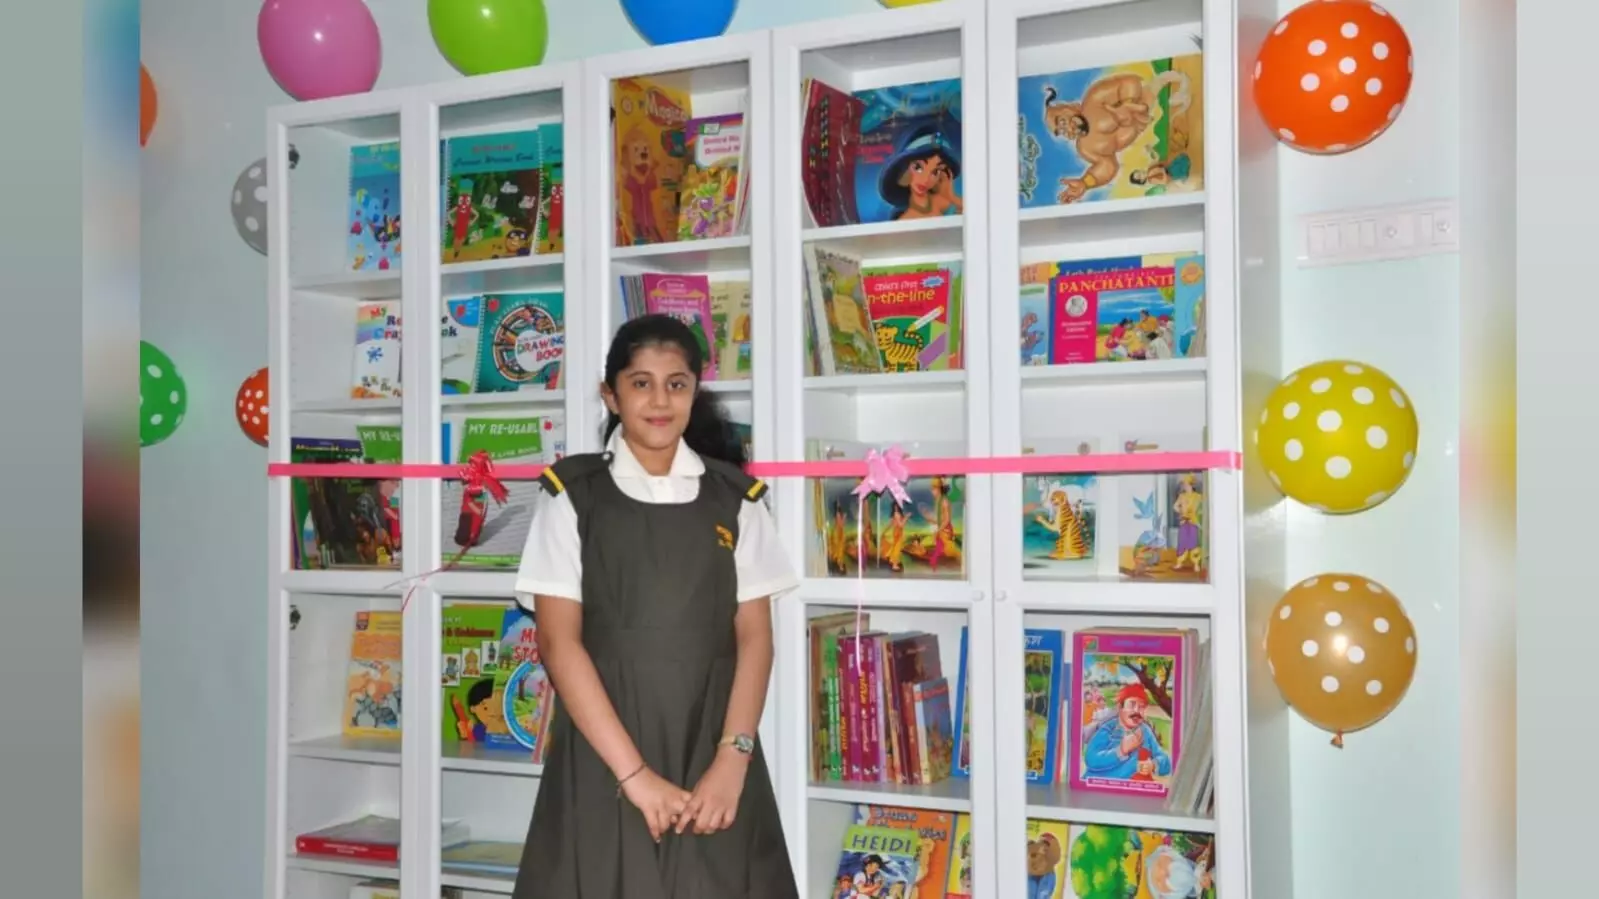 Meet Akarshana Sathish, an 11-year-old HPS student on spree of setting up libraries